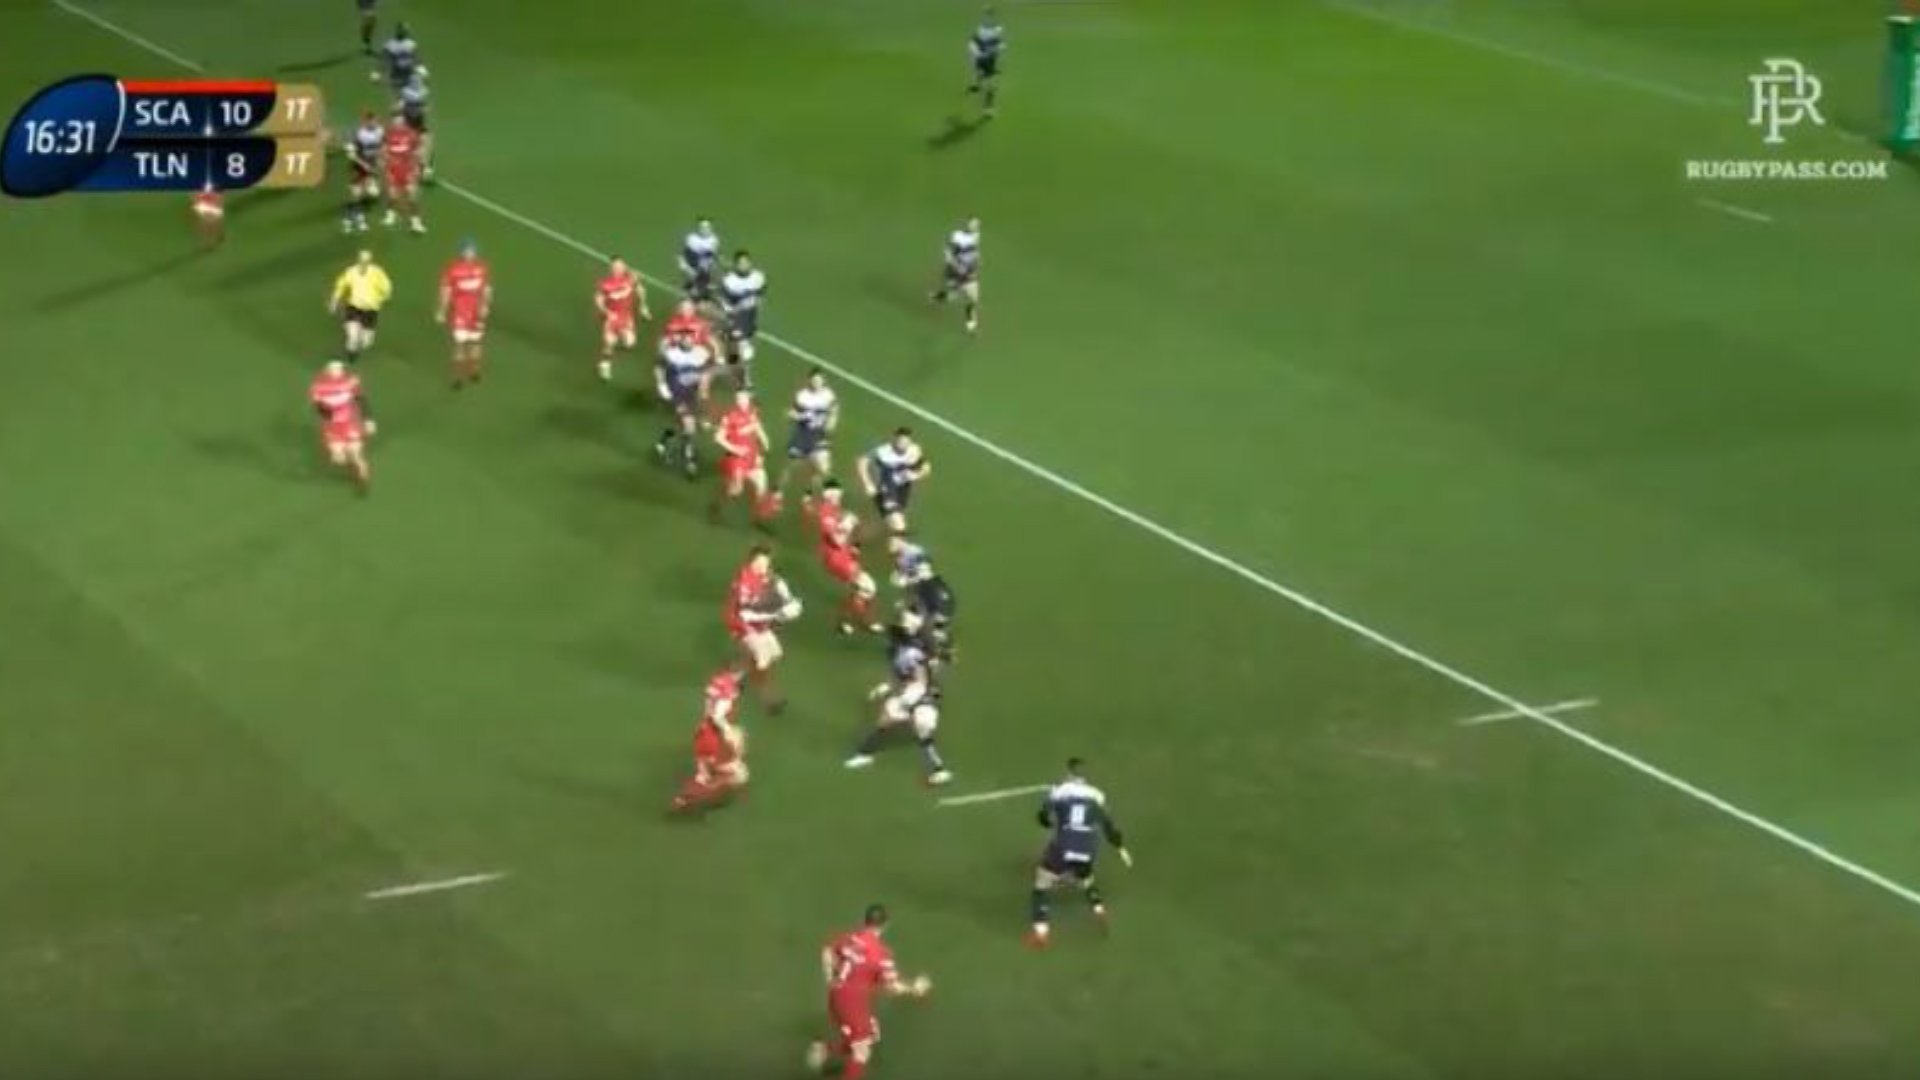 WATCH: King Ashton shows ridiculous pace to score from own 22